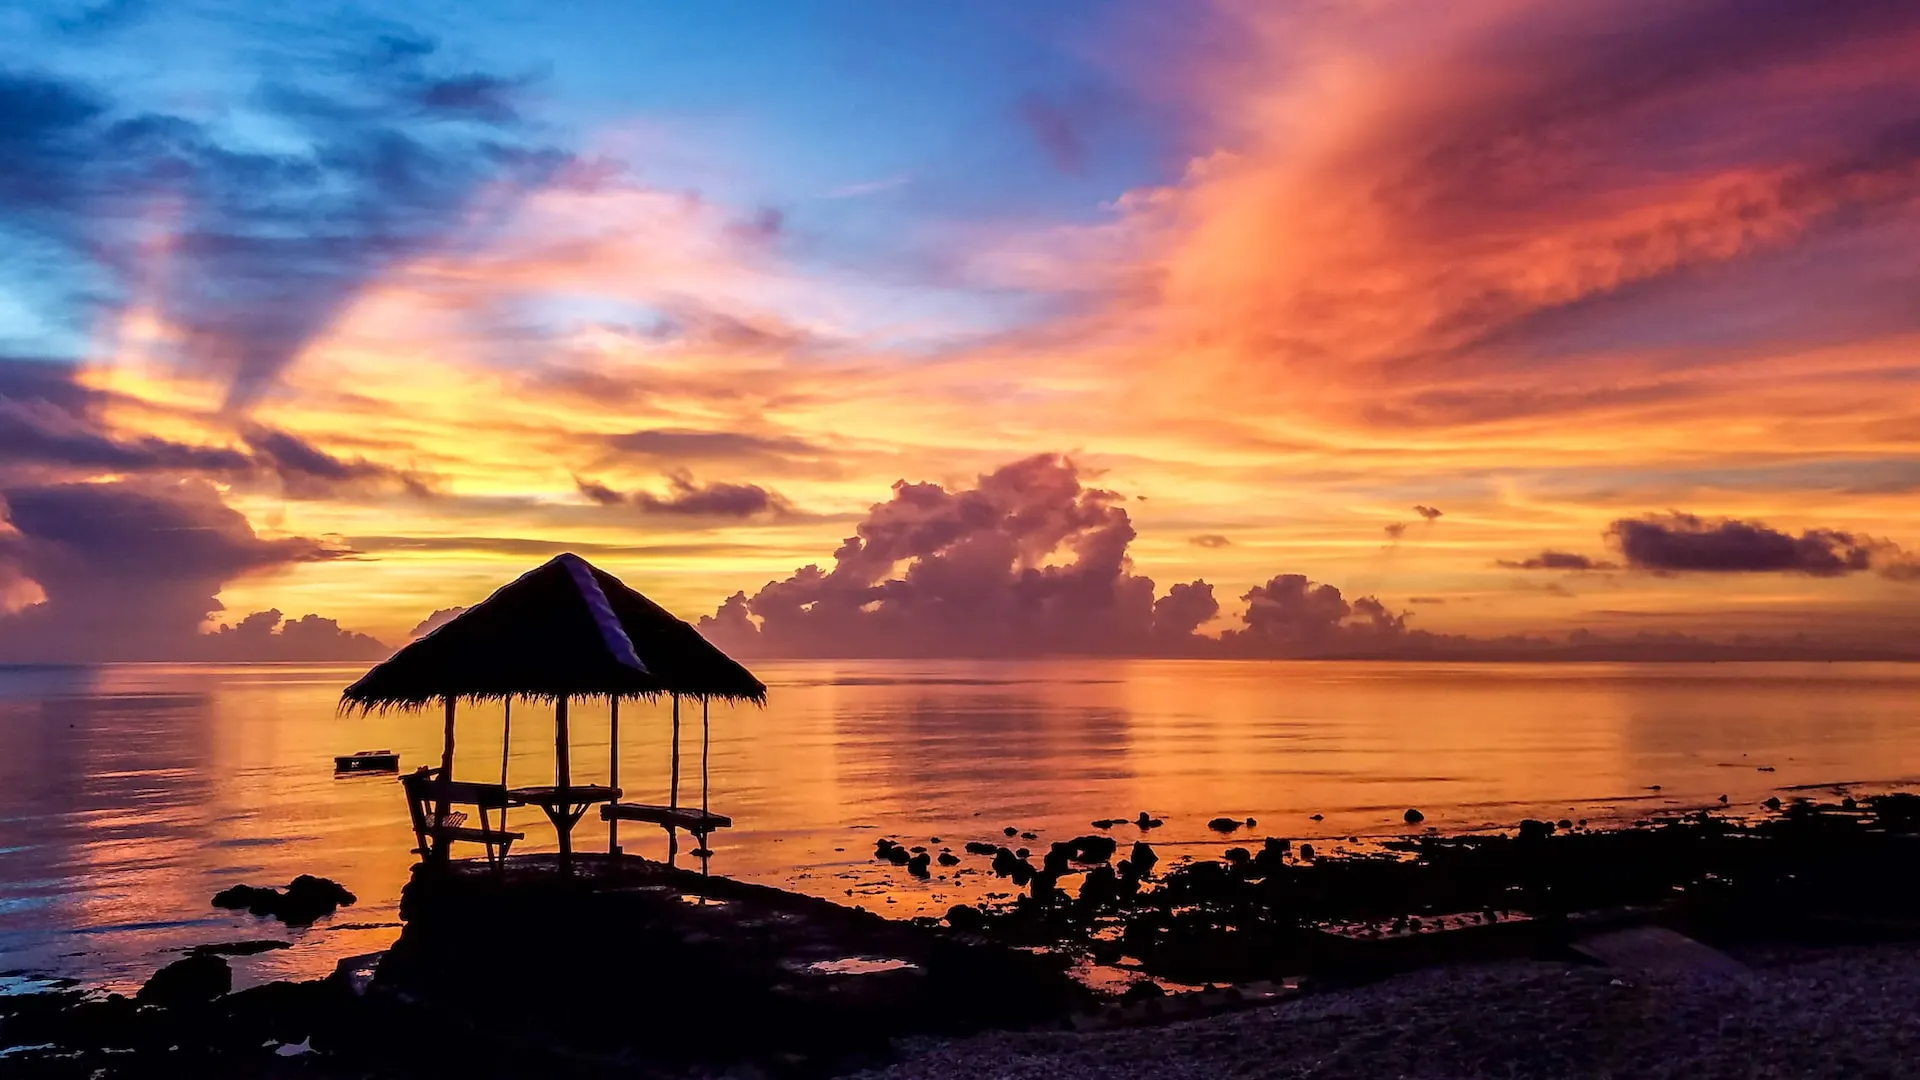 Sunset in Cebu, Source: Photo by Mike L on Unsplash